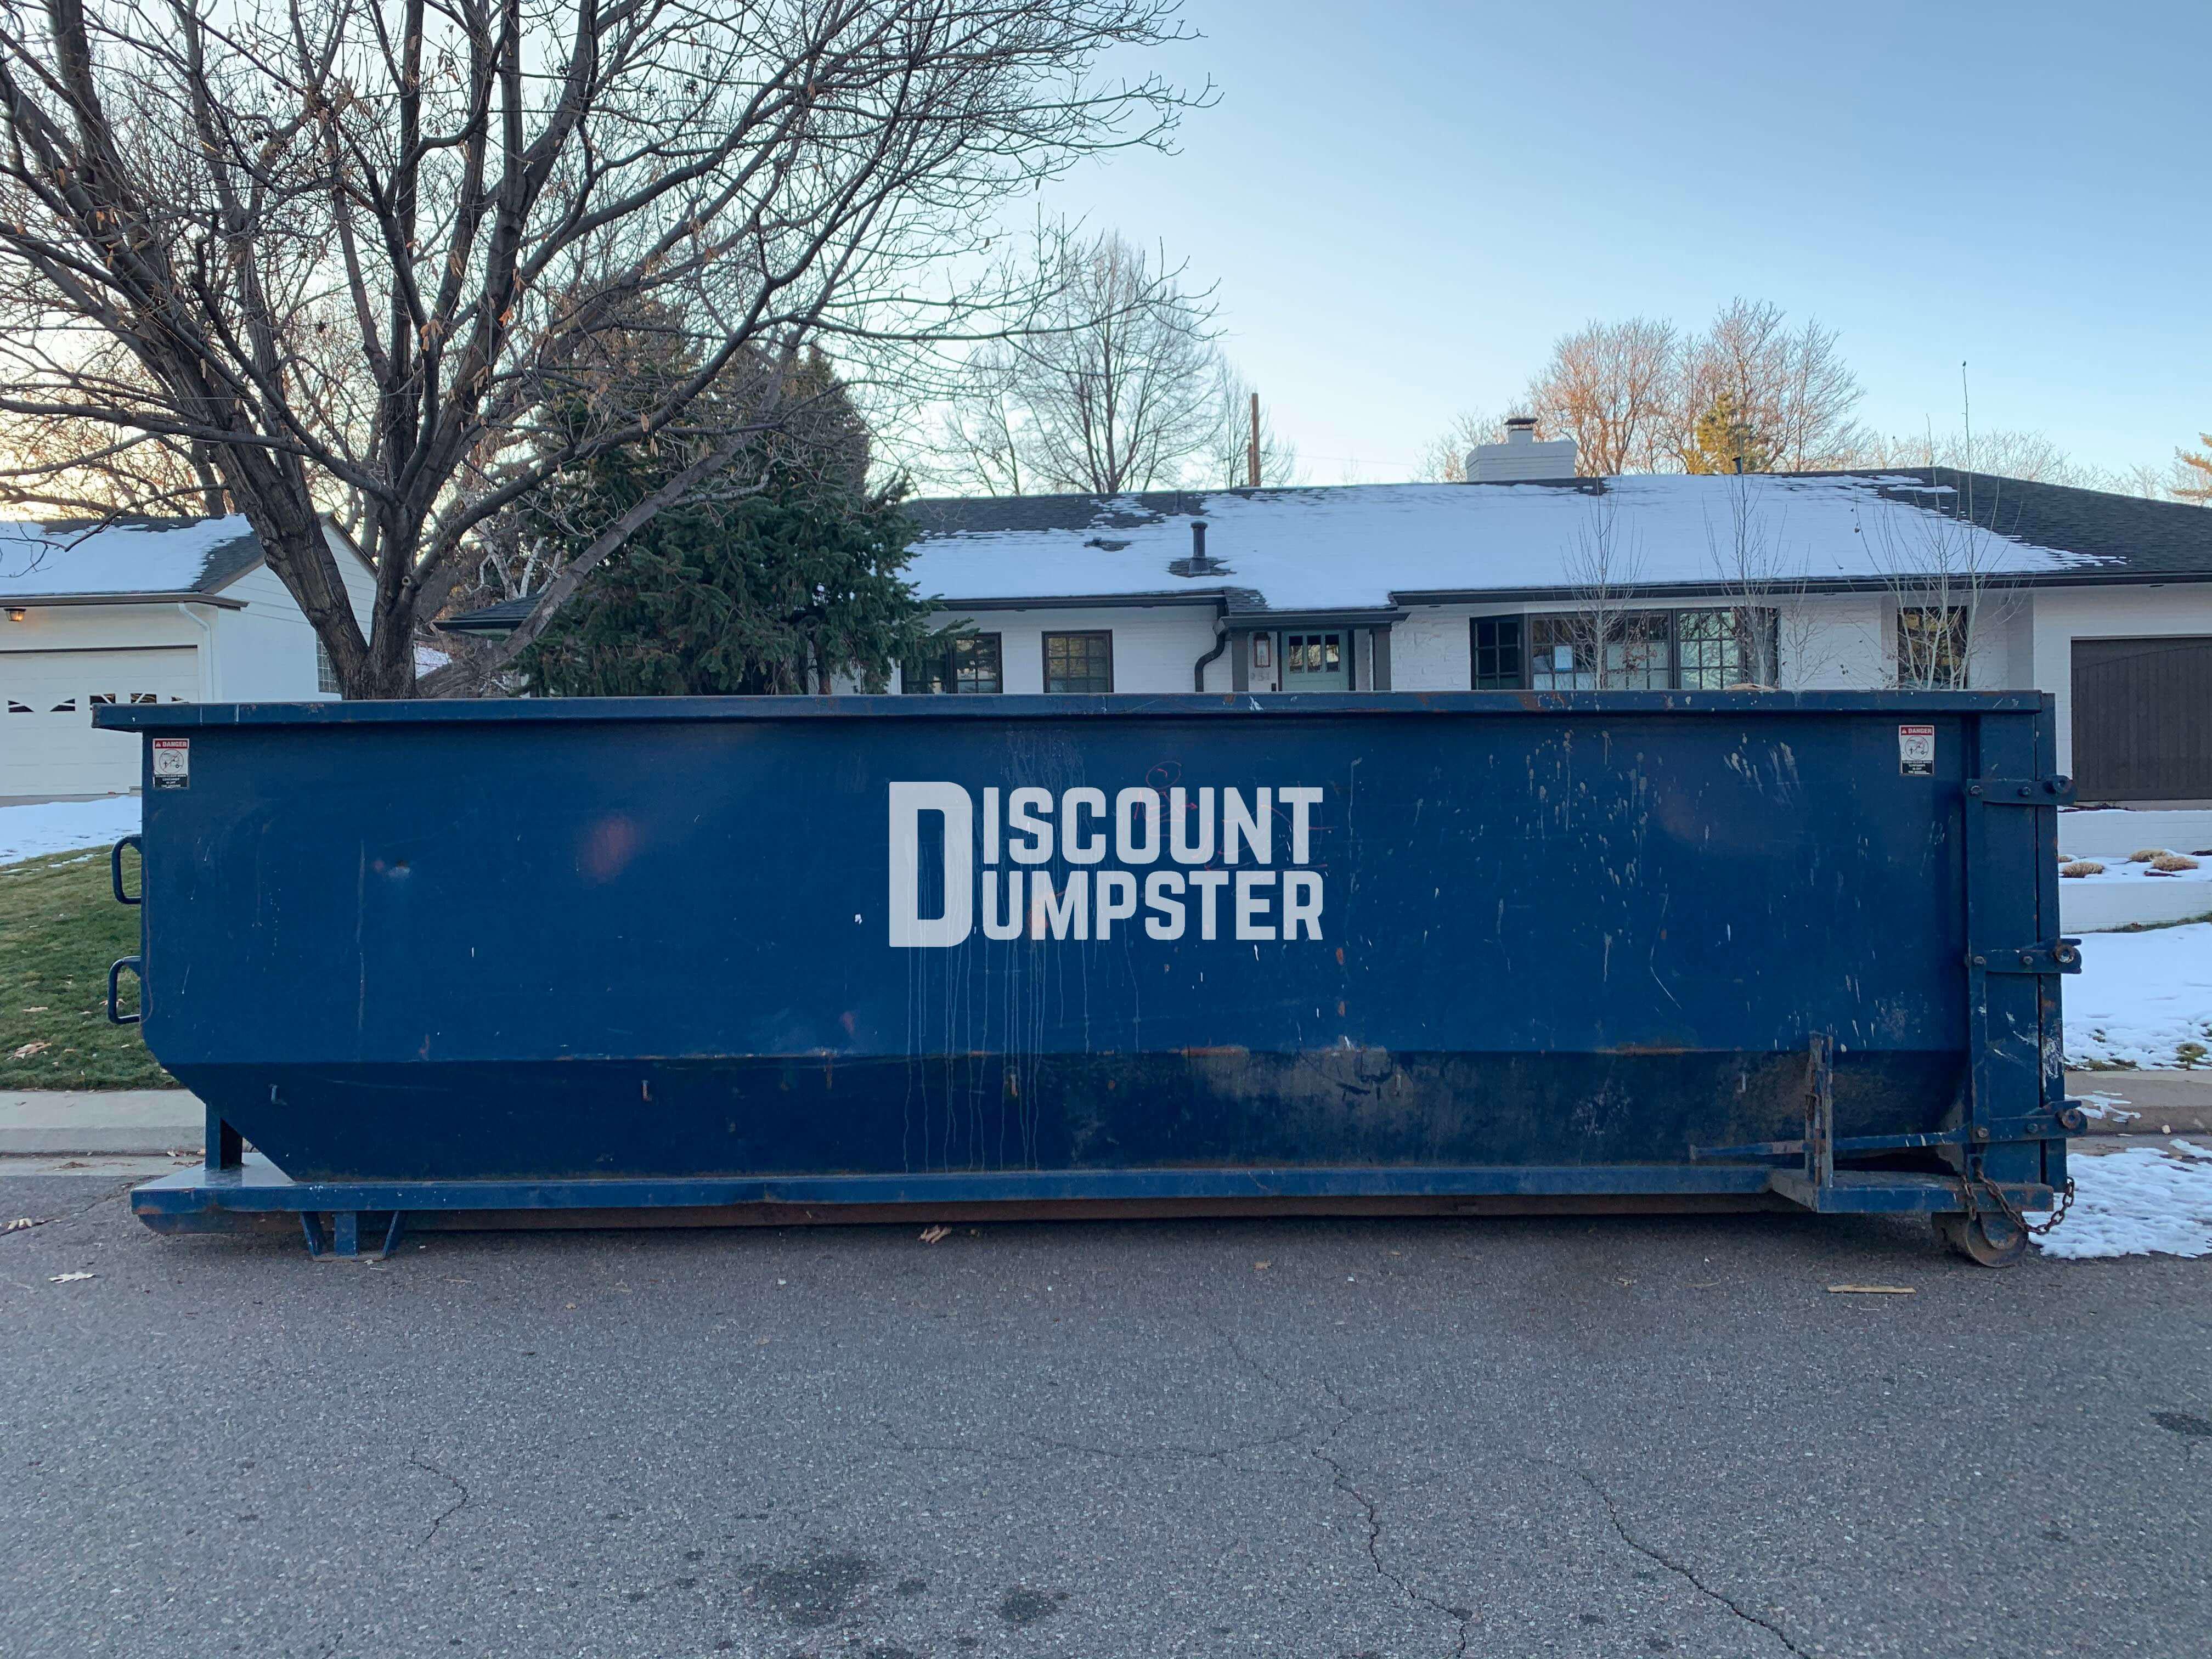 Discount dumpster is the easiest way to take care of waste removal in chicago il